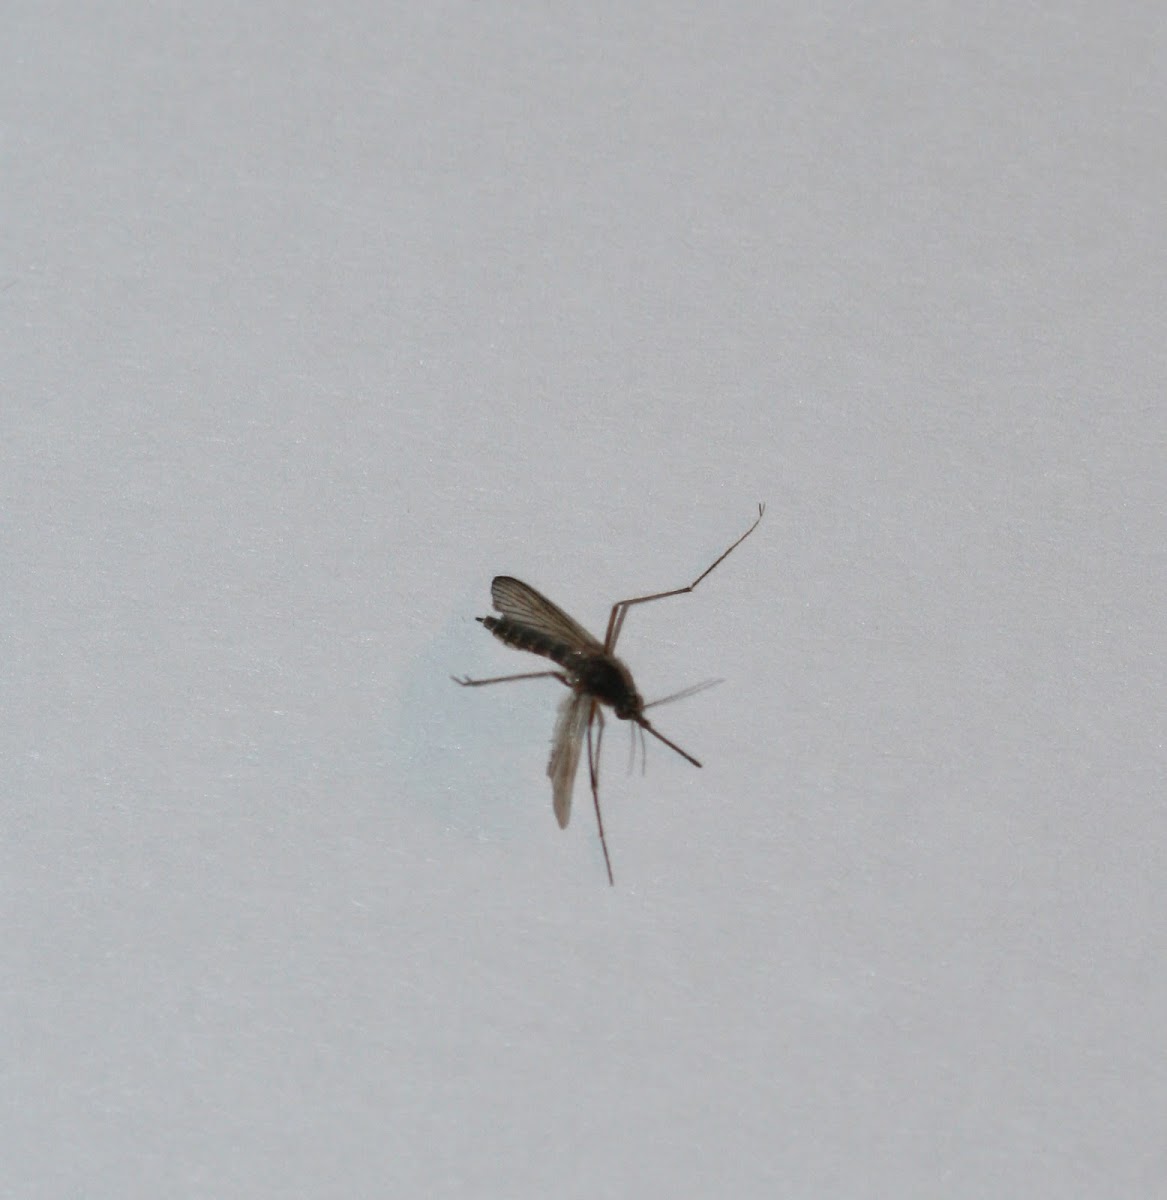 Inland Floodwater Mosquito